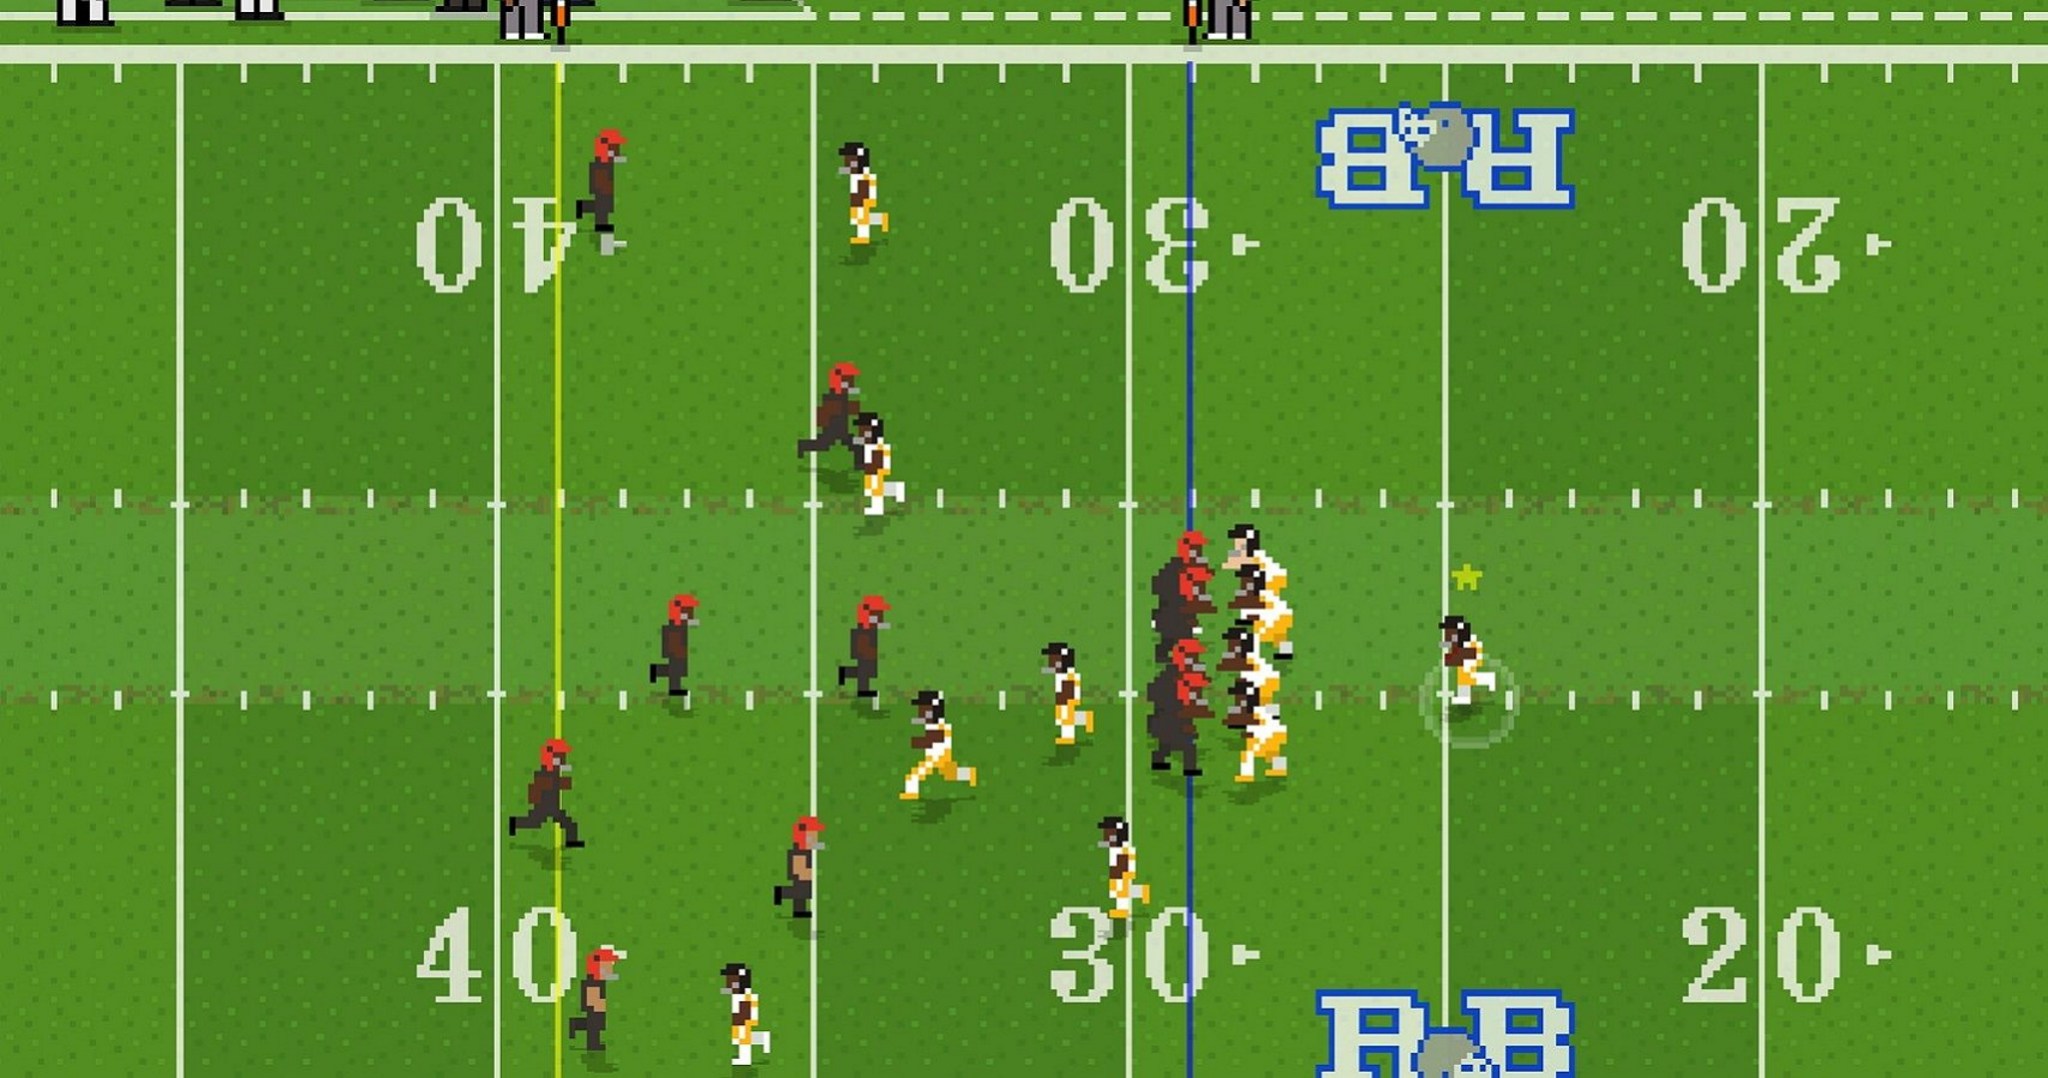 Retro Bowl Update Adds Kickoff Returns, Replay Controls and More